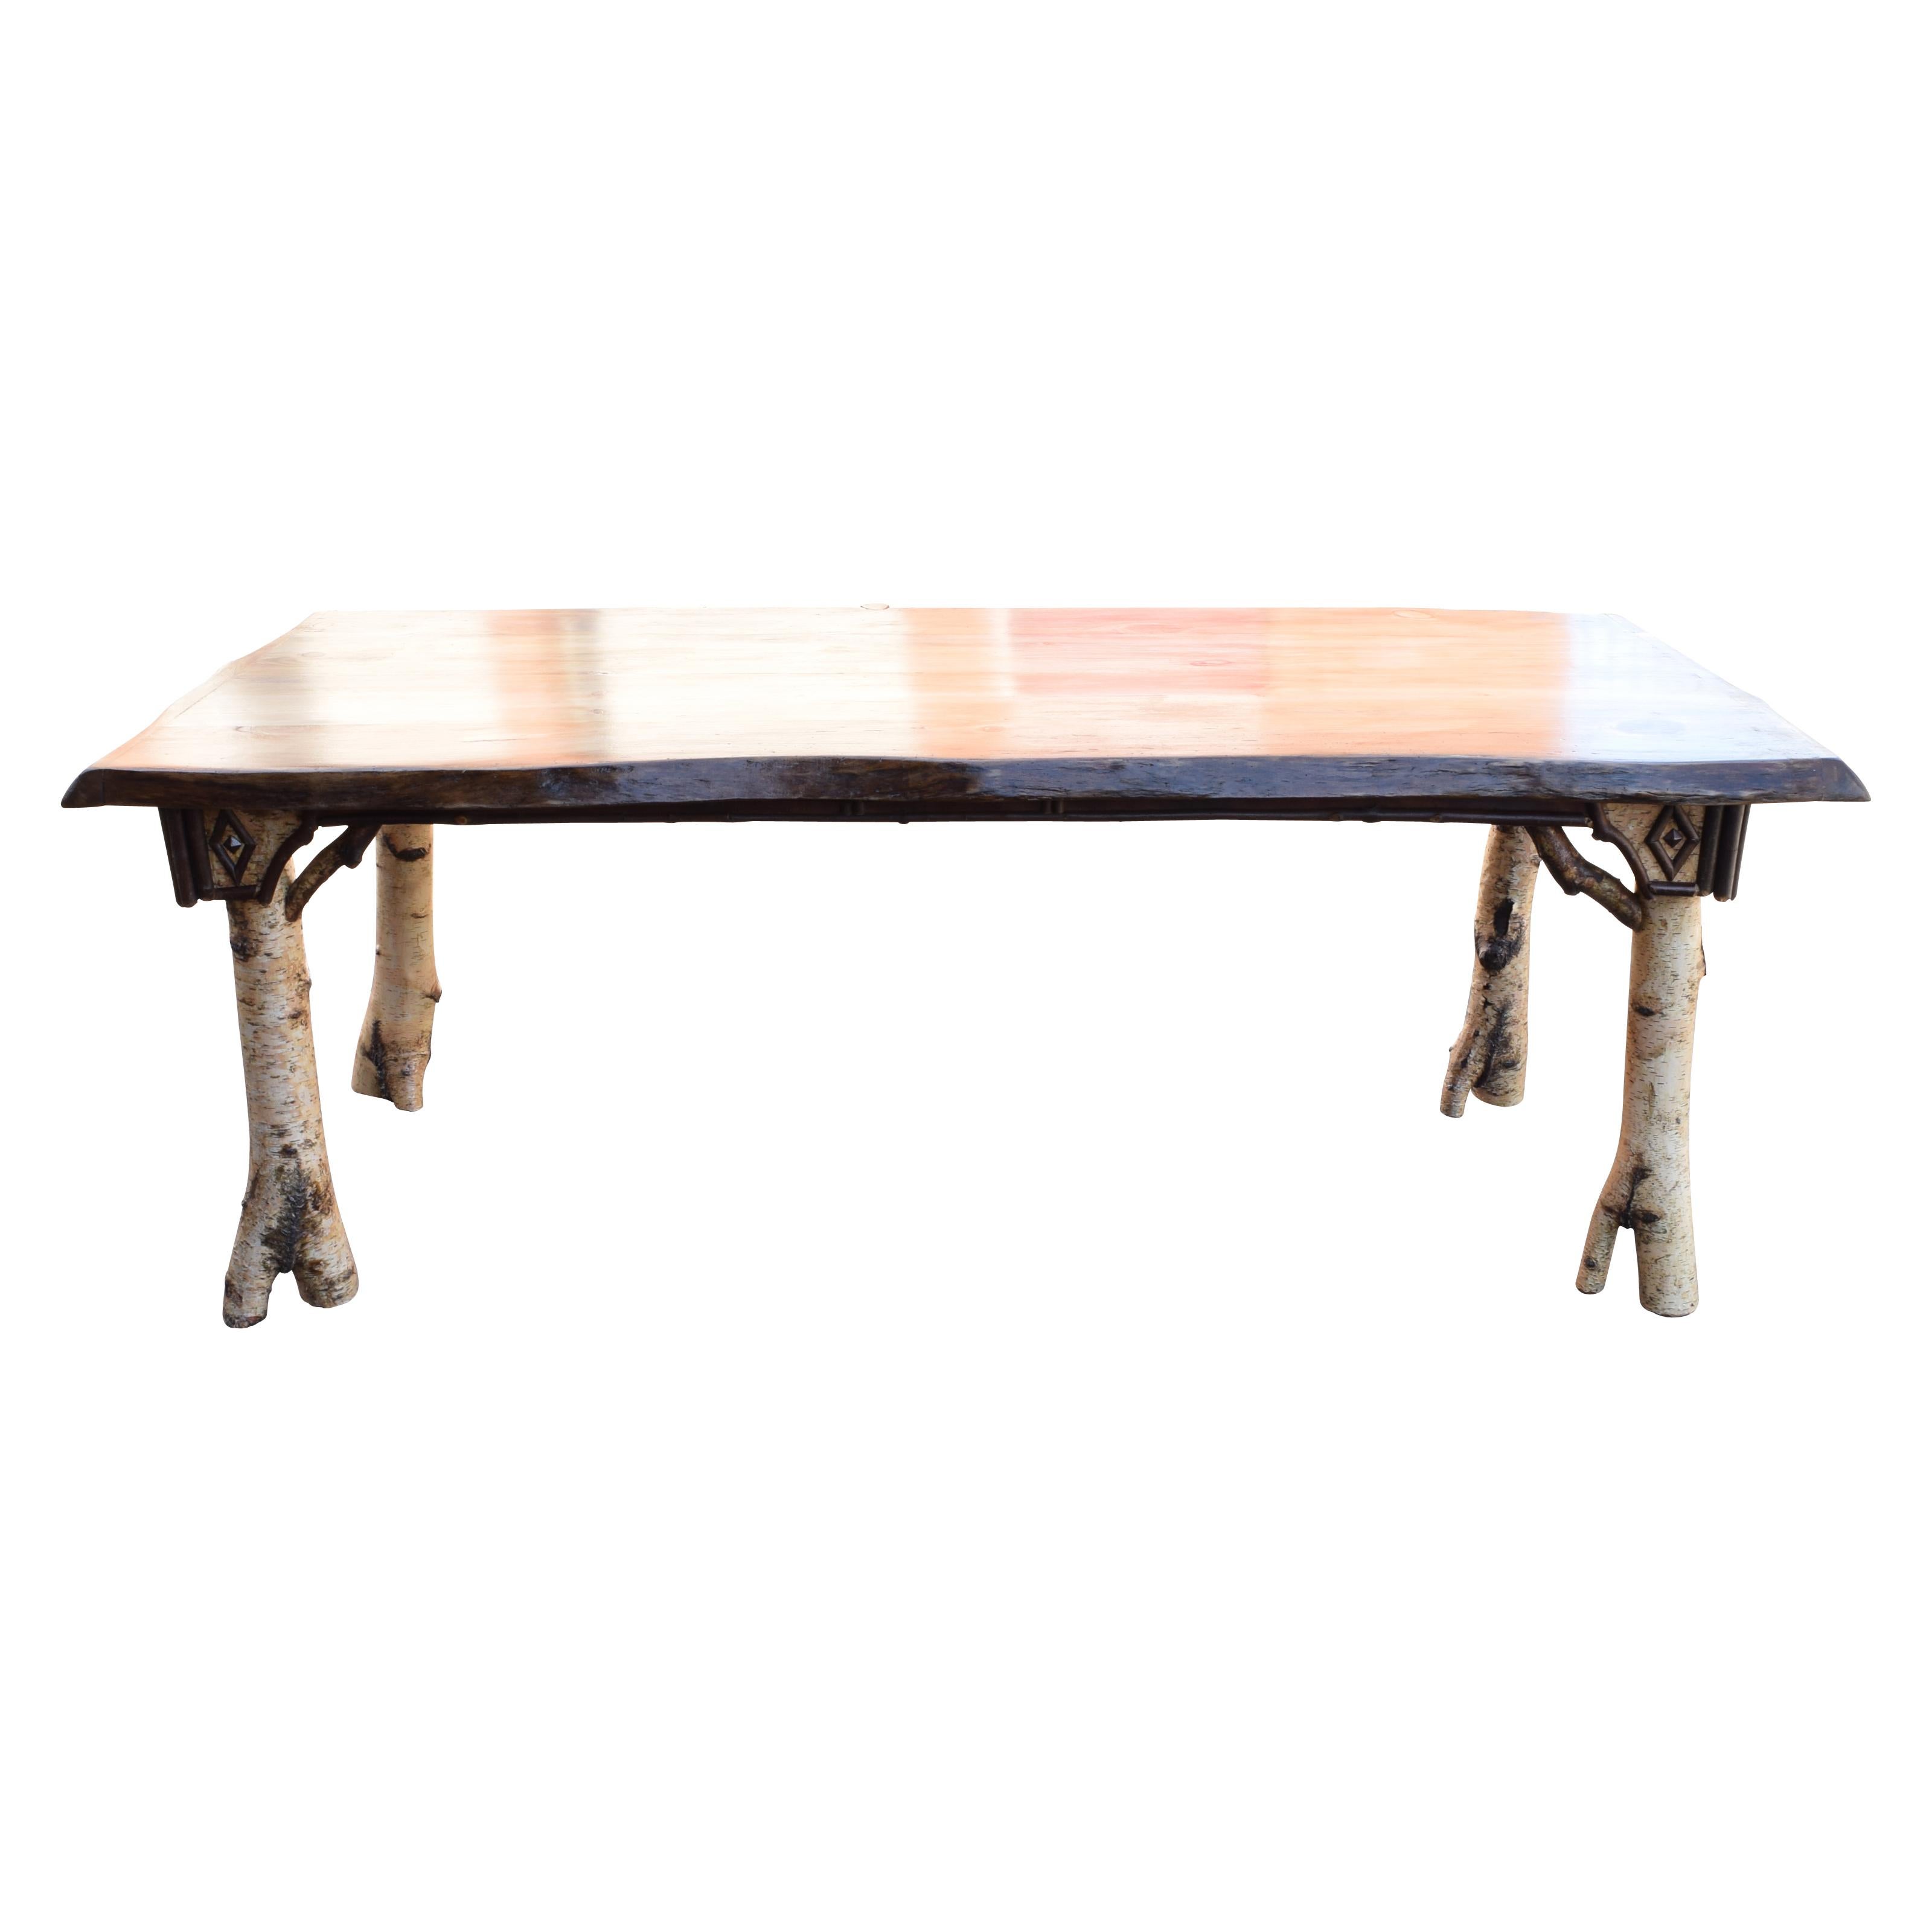 Contemporary Cisco's Adirondack Dining Room Table For Sale